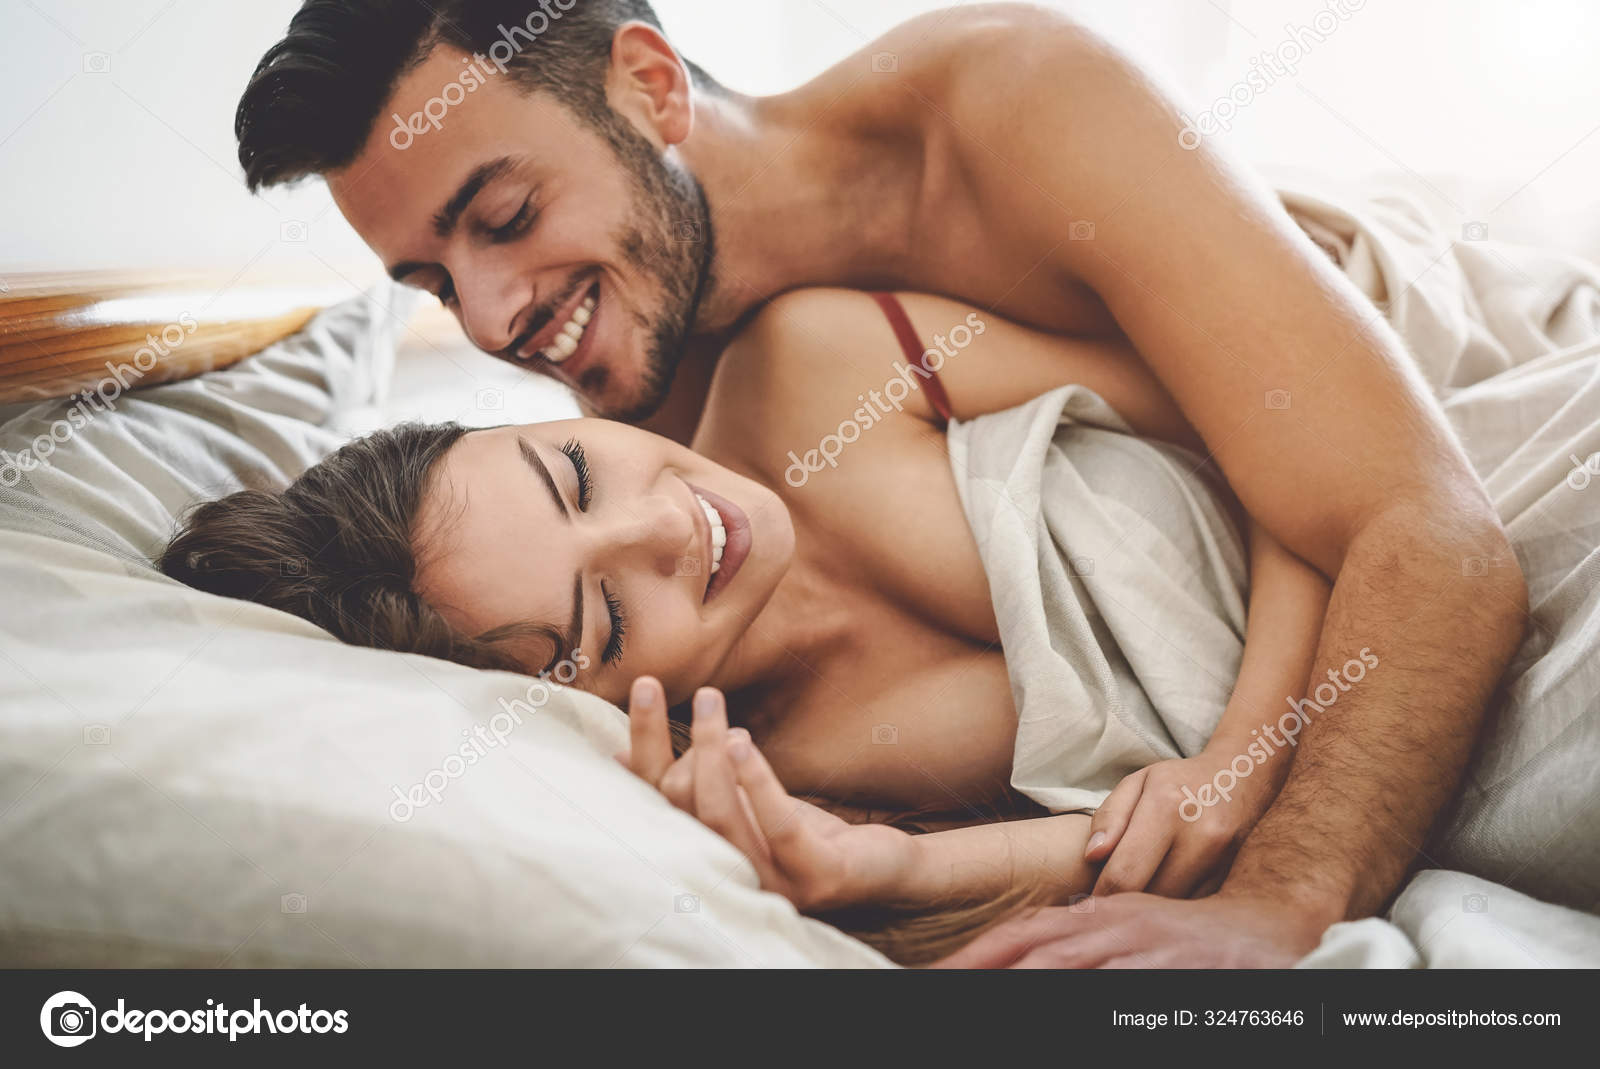 Romantic couple stock image. Image of pose, adult, love - 19362925